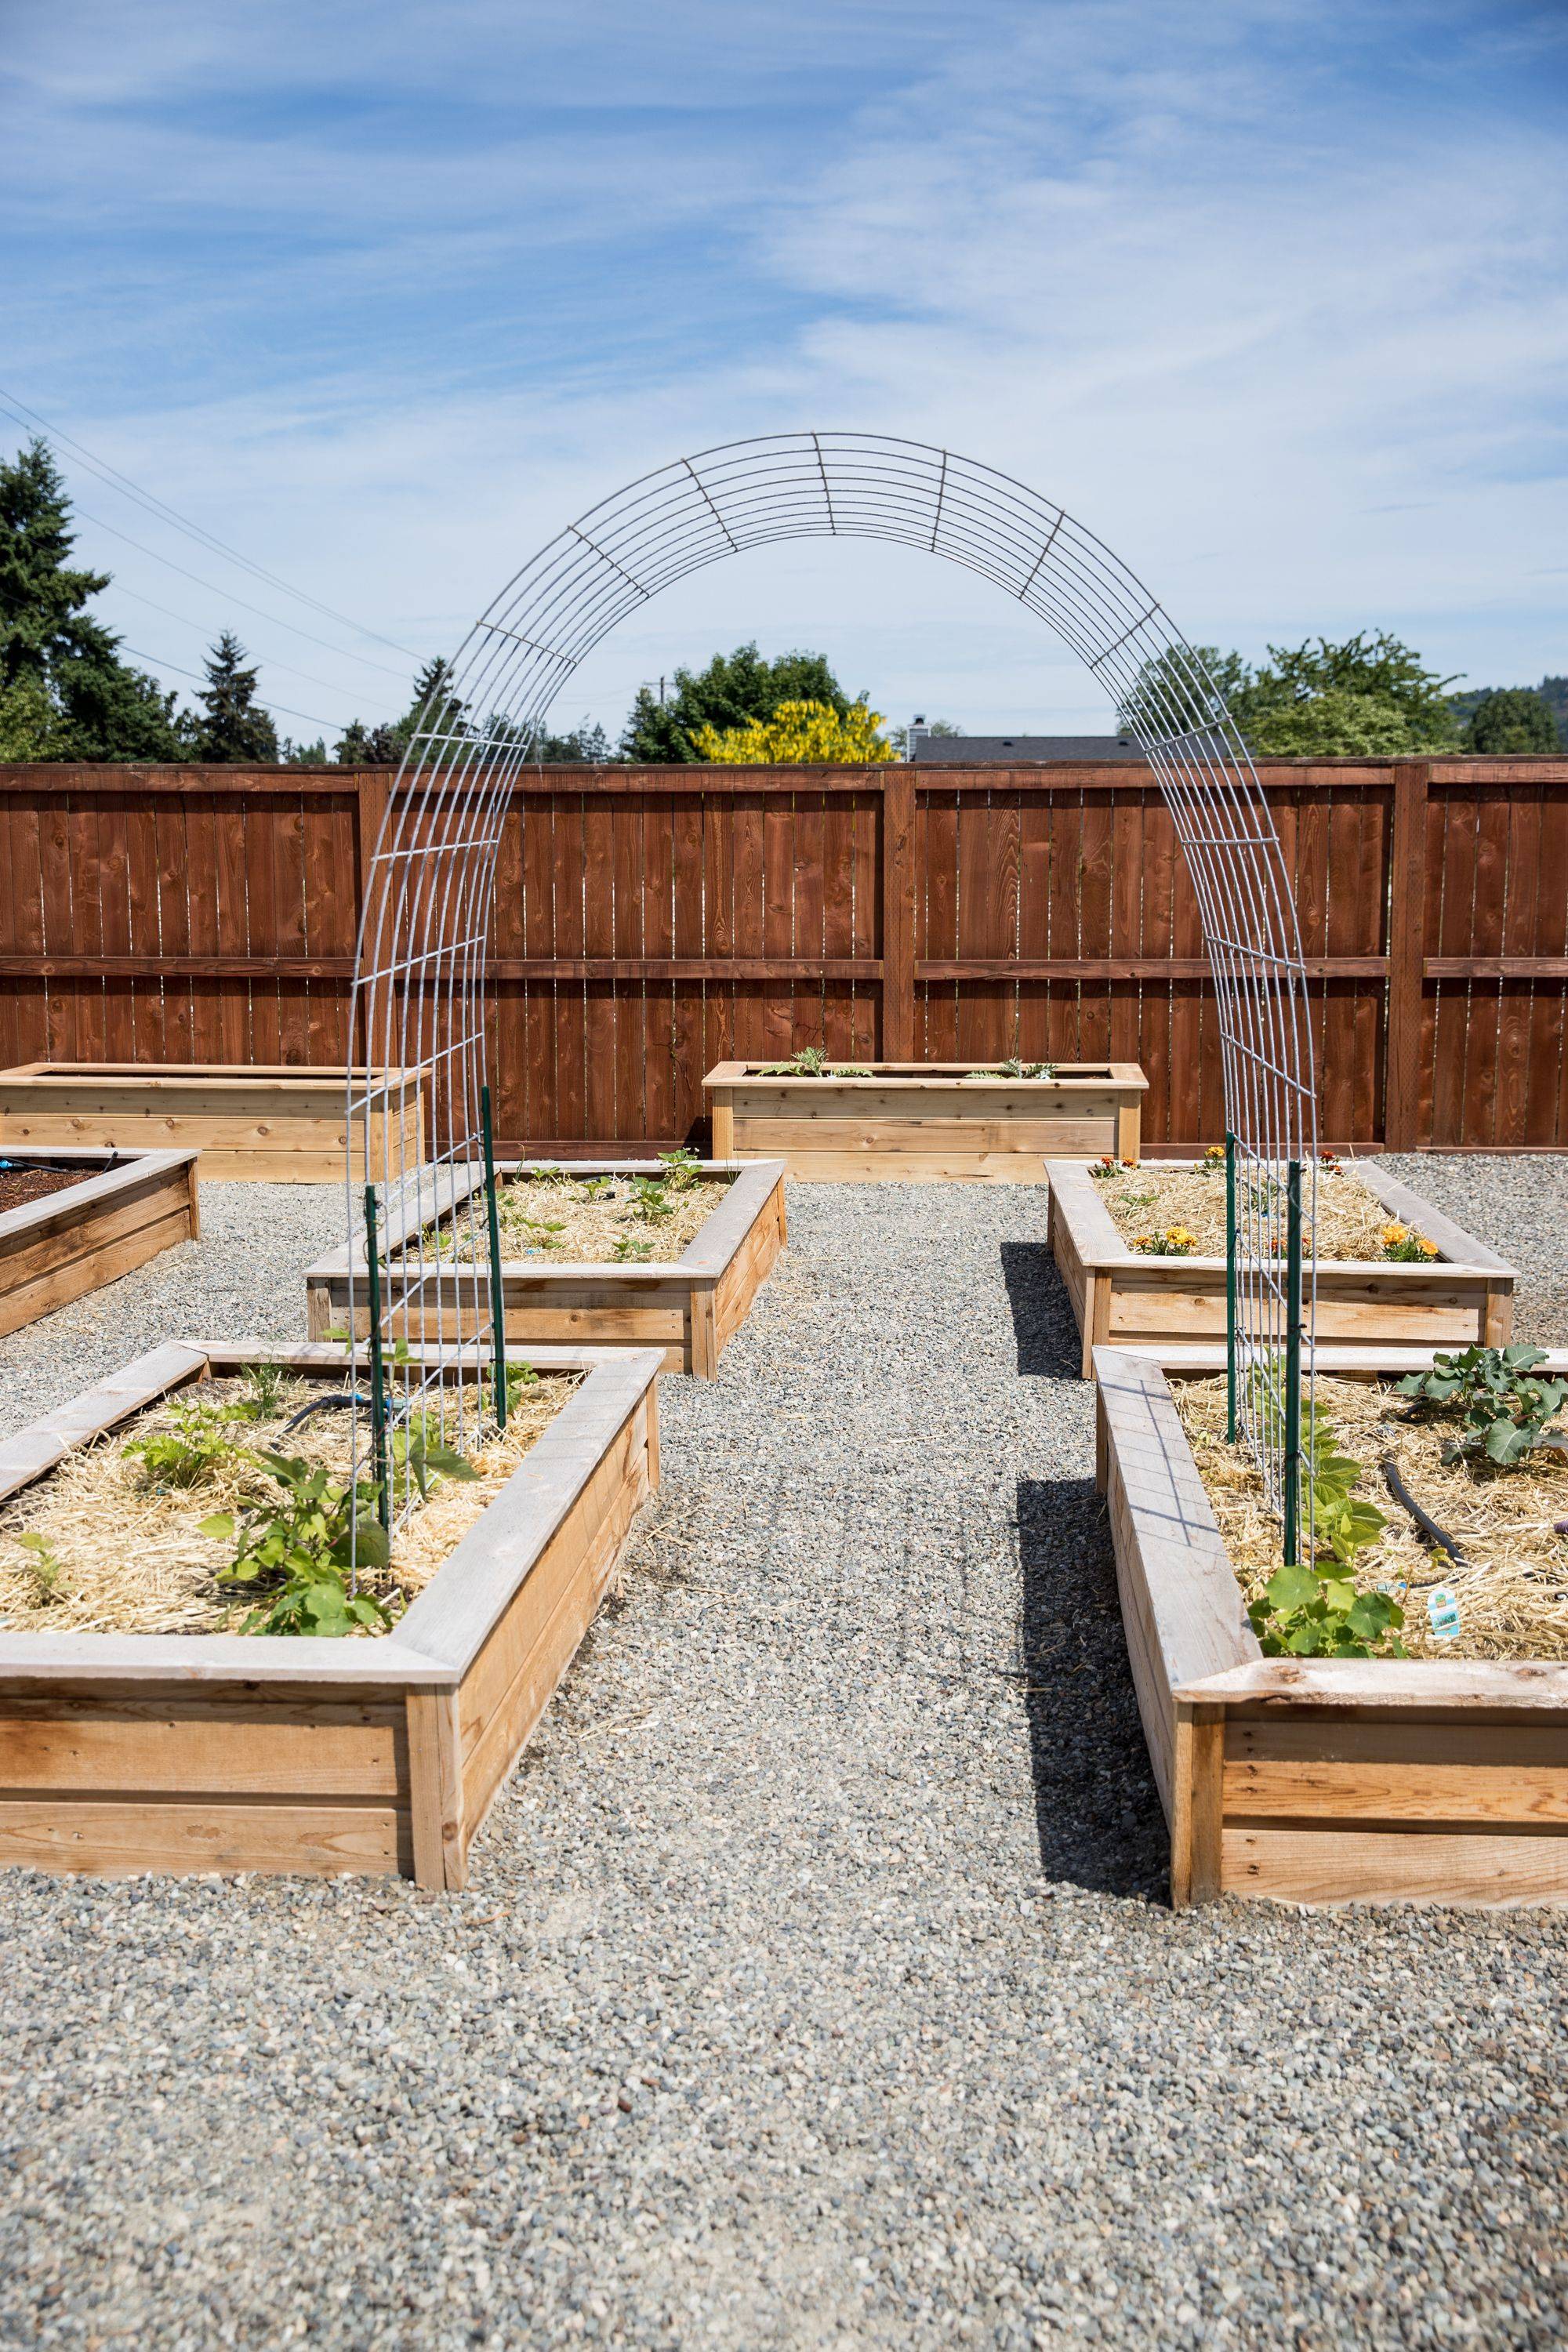 Your New Raised Bed Garden